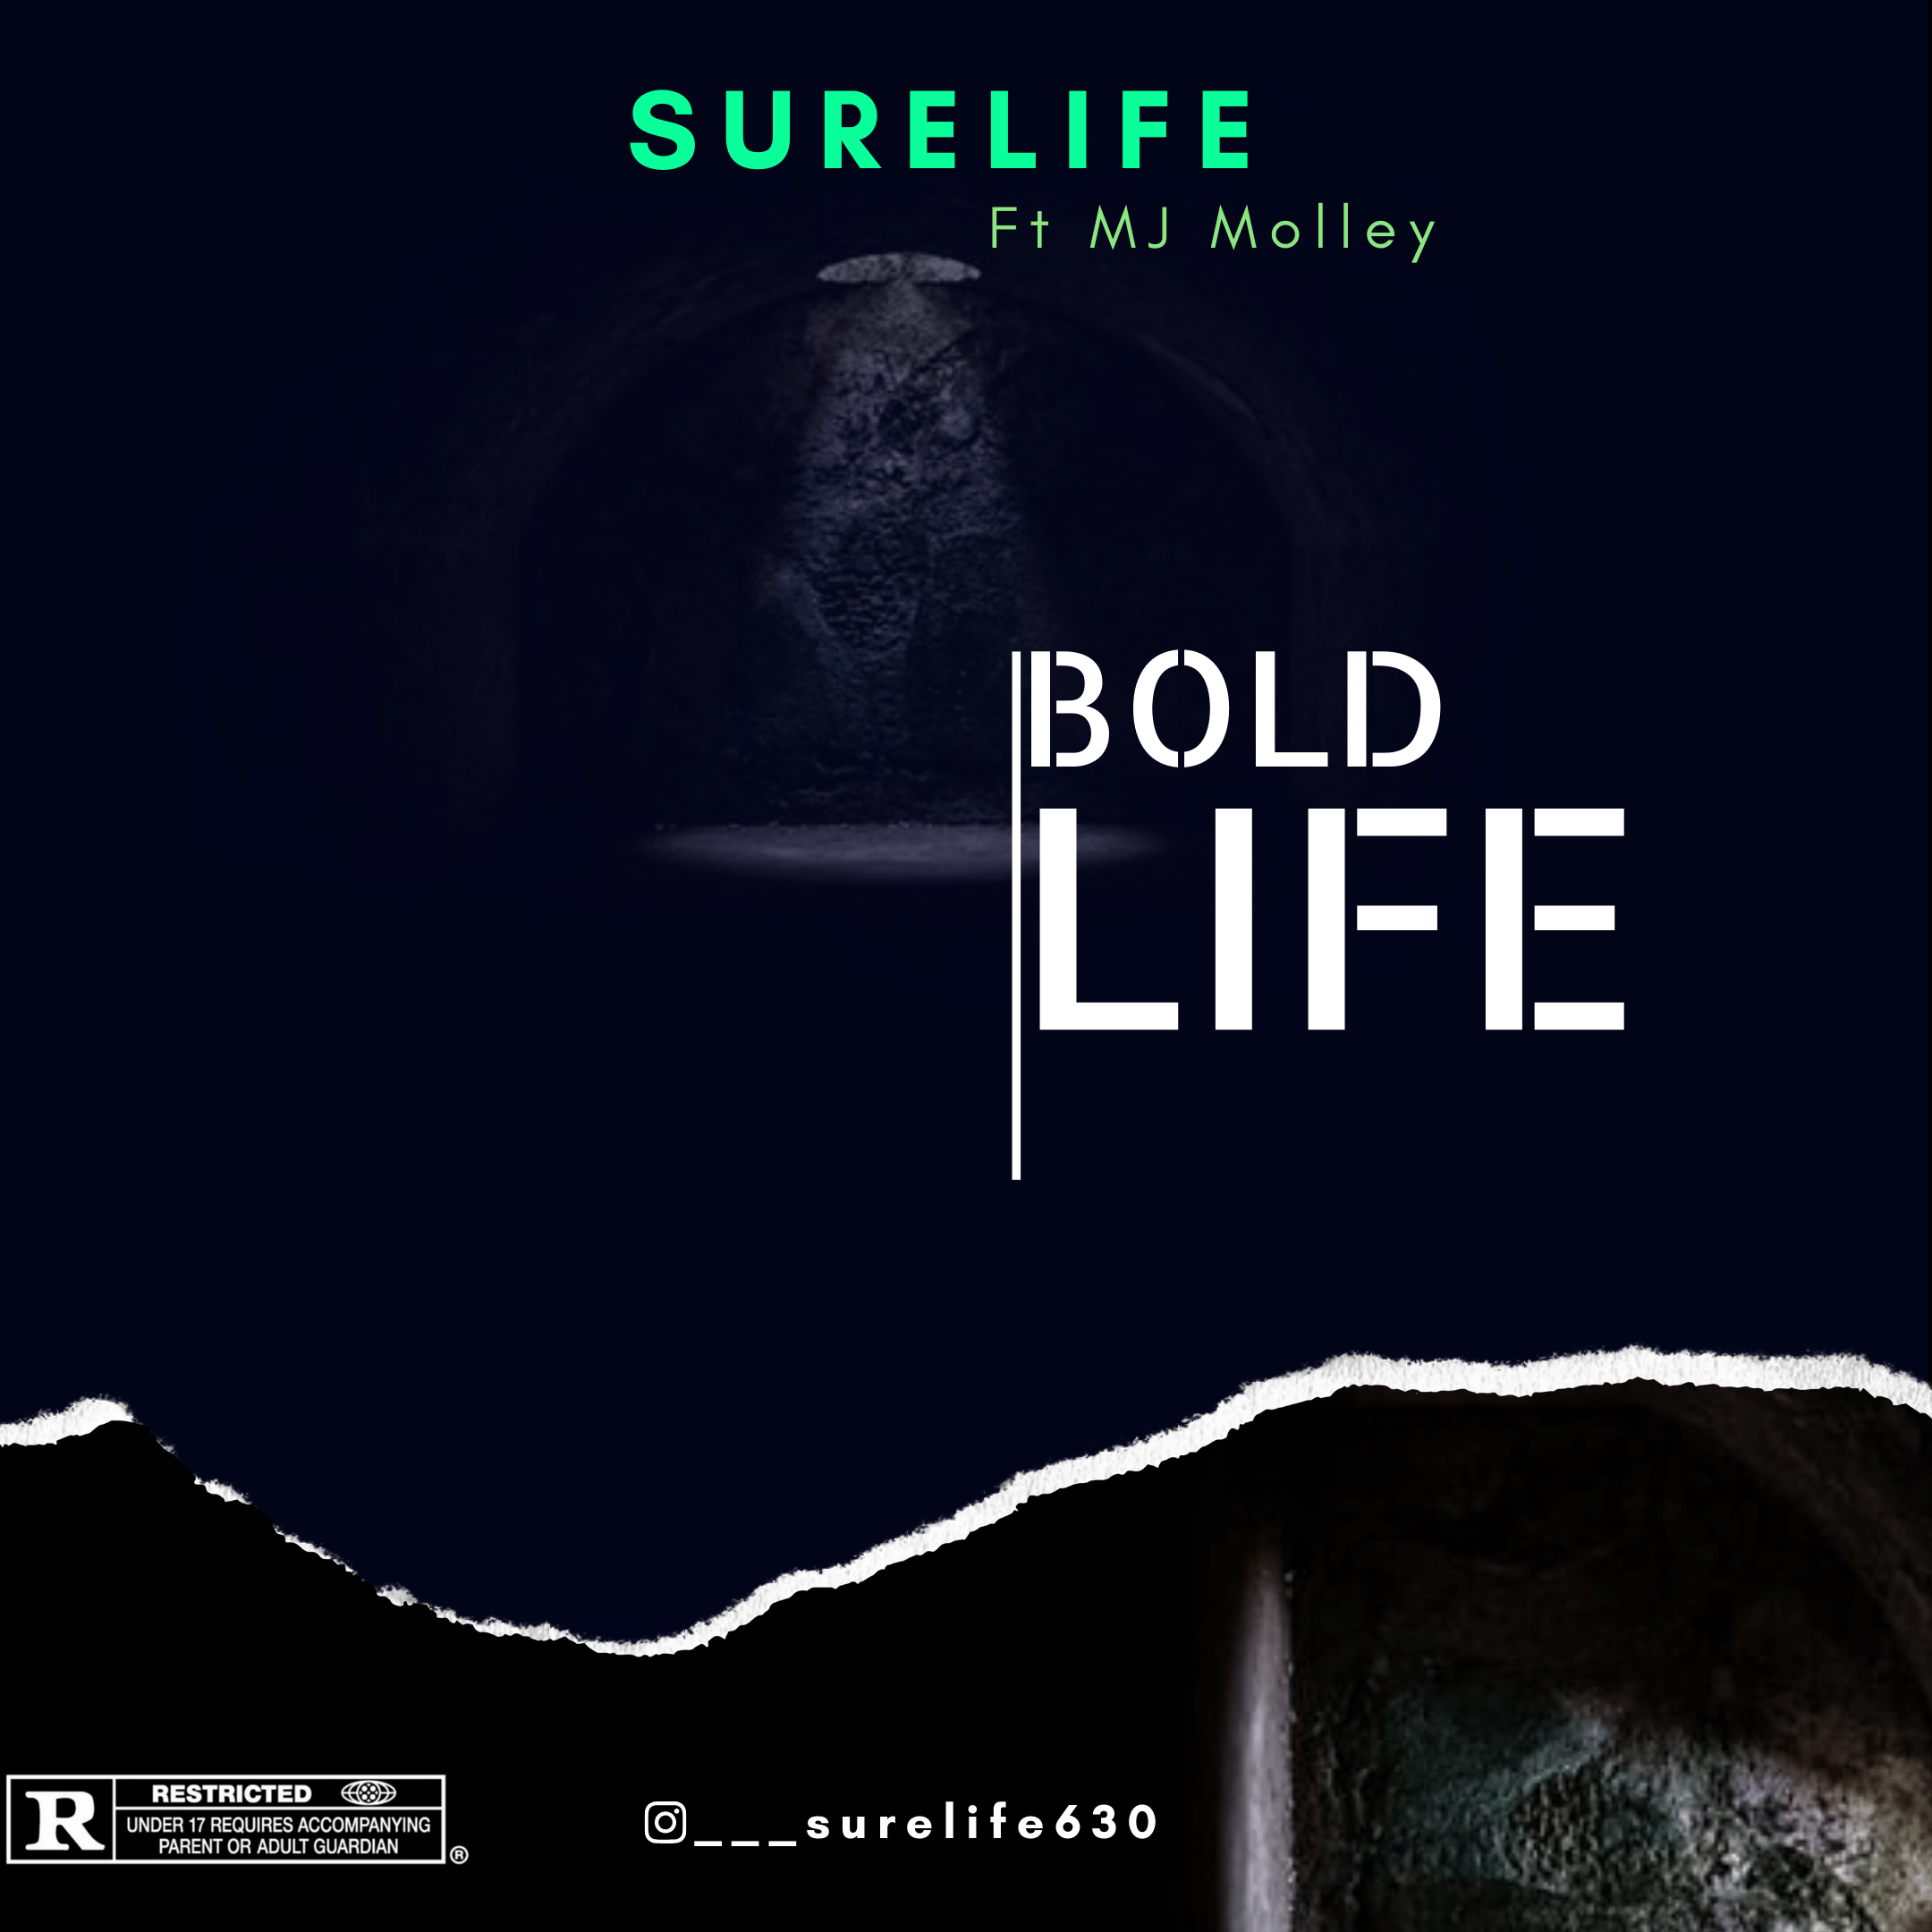 Bold Life by Surelife